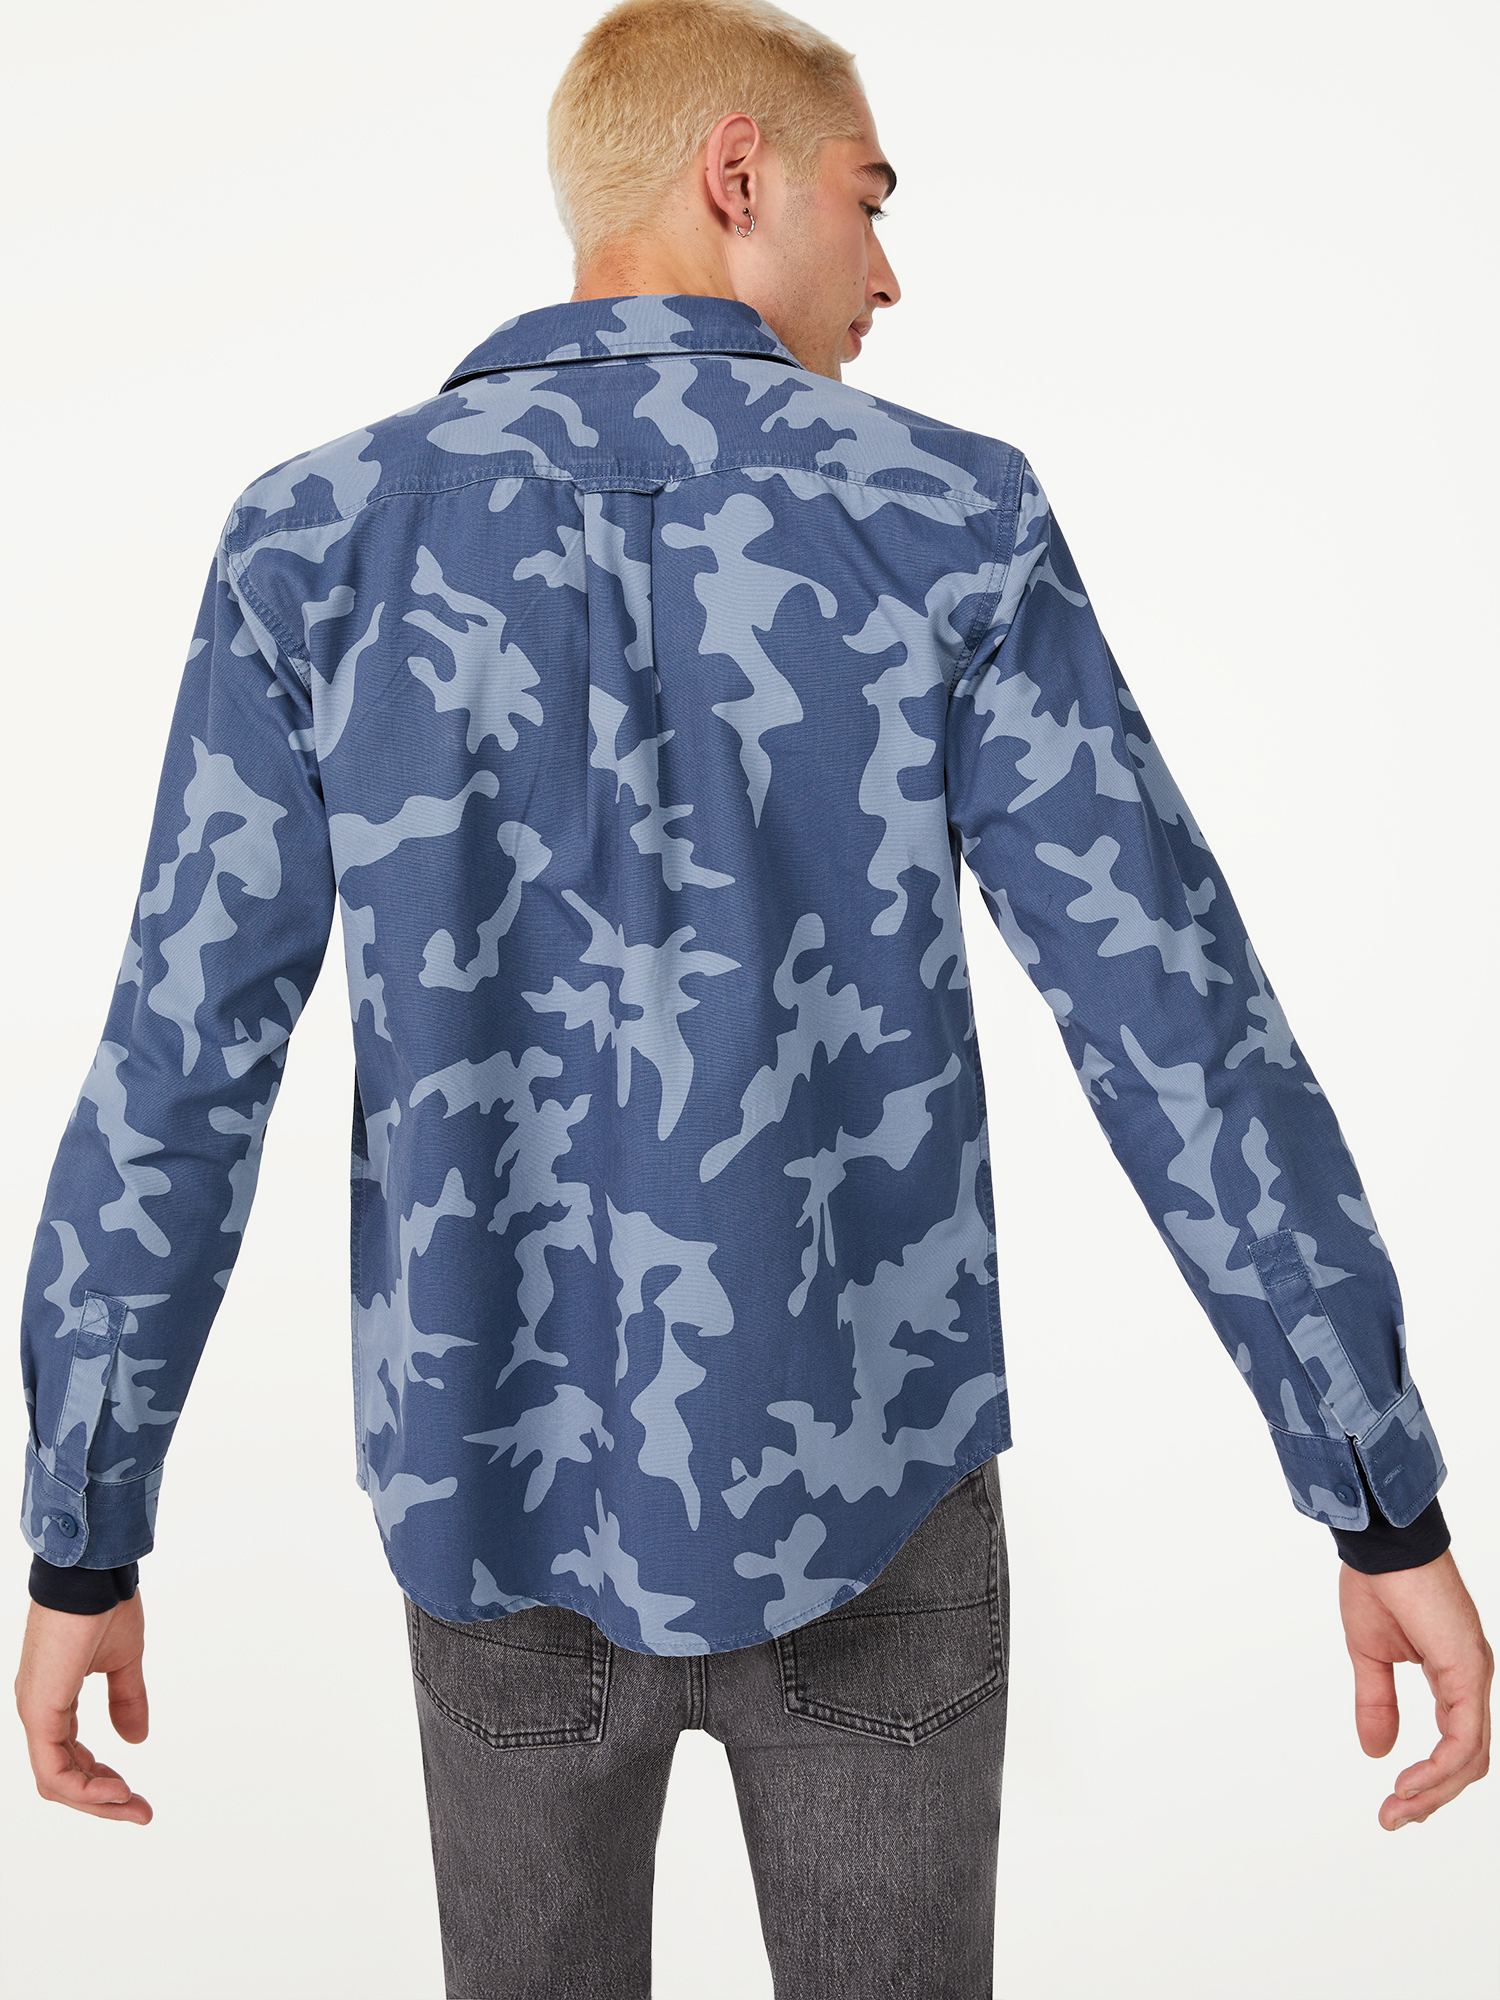 Free Assembly Men's Cotton Canvas Shirt Jacket - image 3 of 5